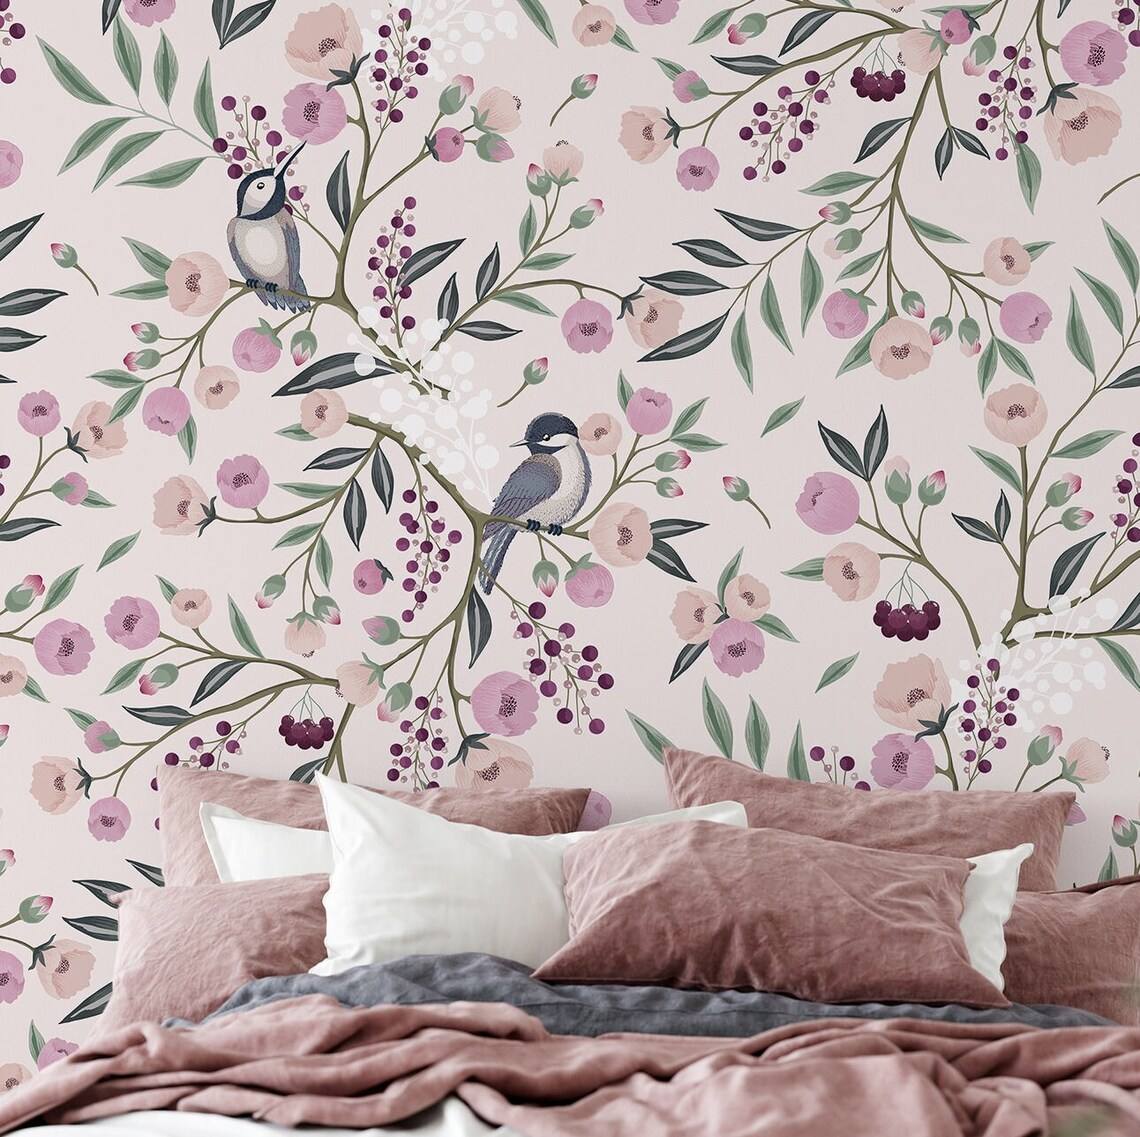 pink room with a fl، wallpaper, a bed, pillows and blanket